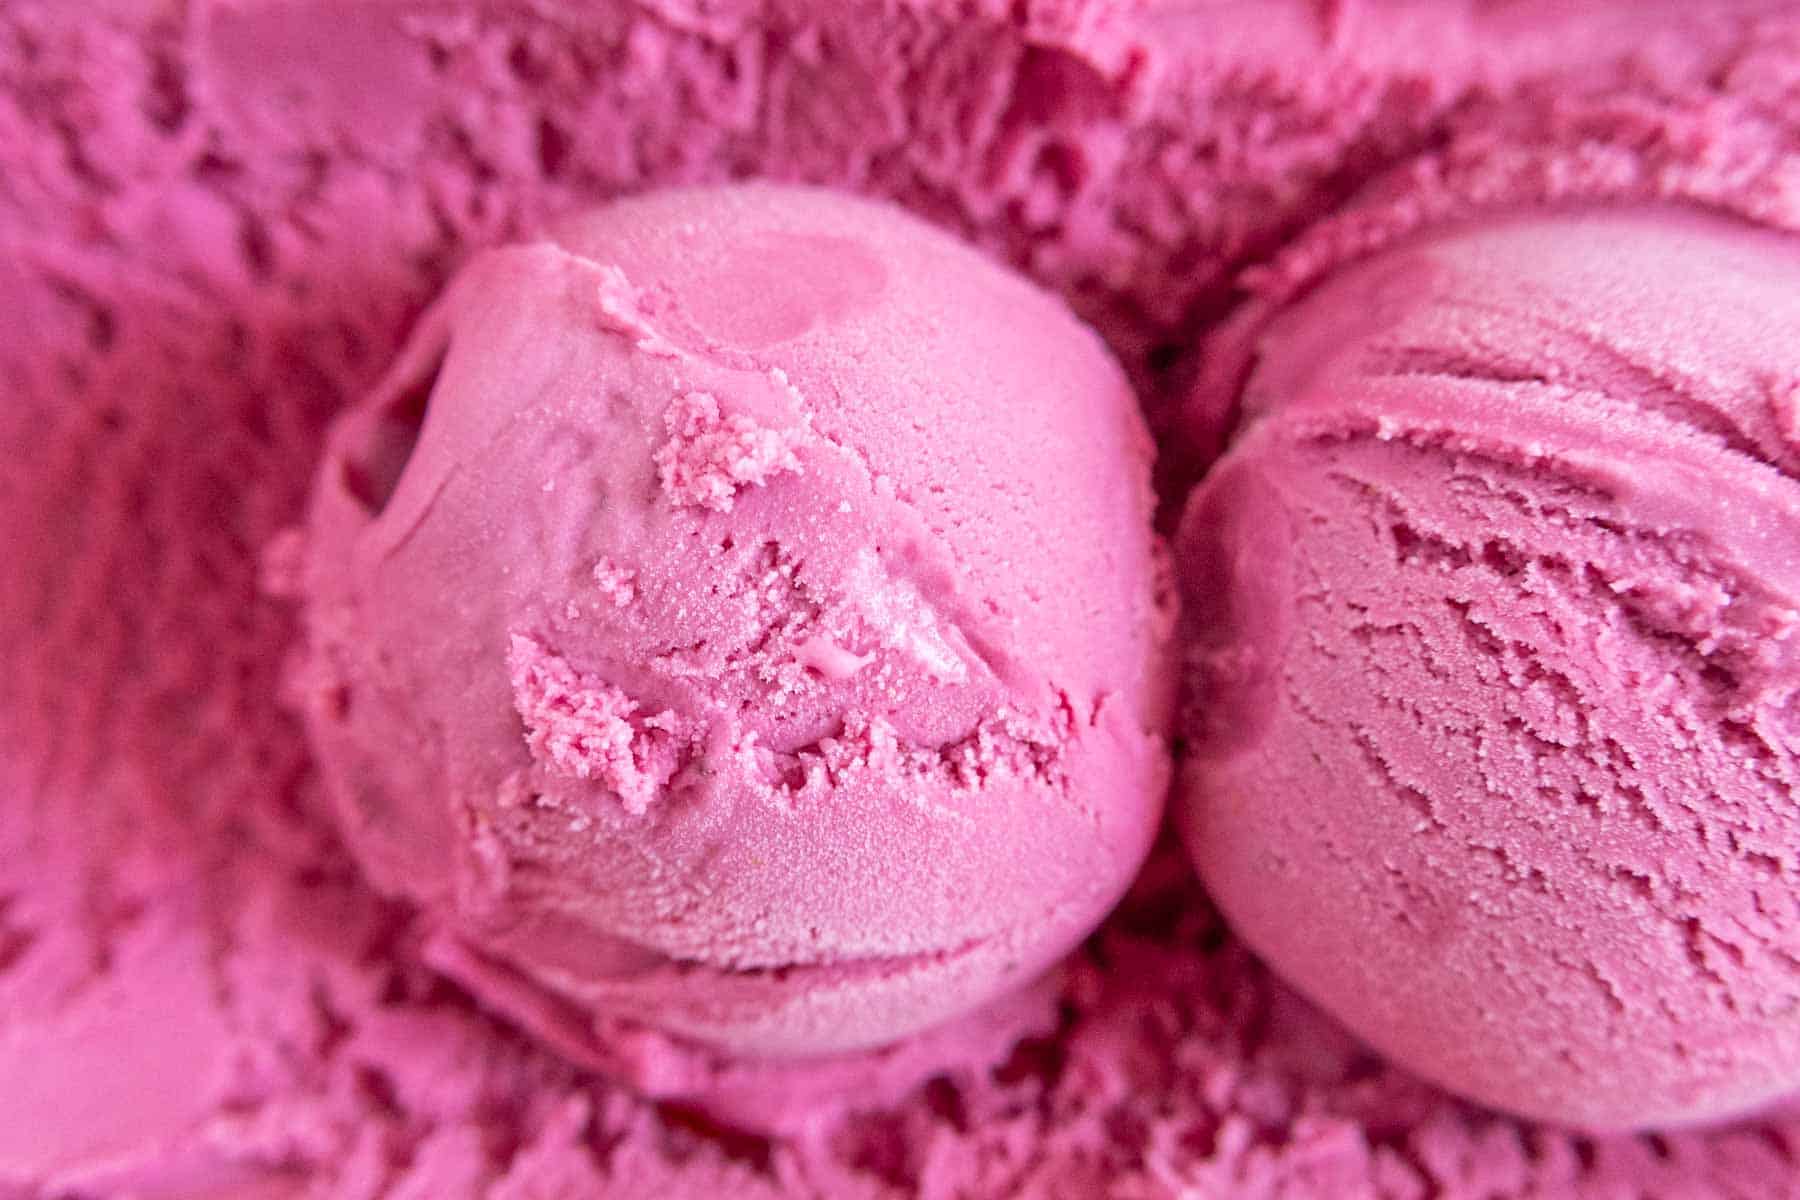 Close-up of two scoops of pink ice cream with a smooth, creamy texture.